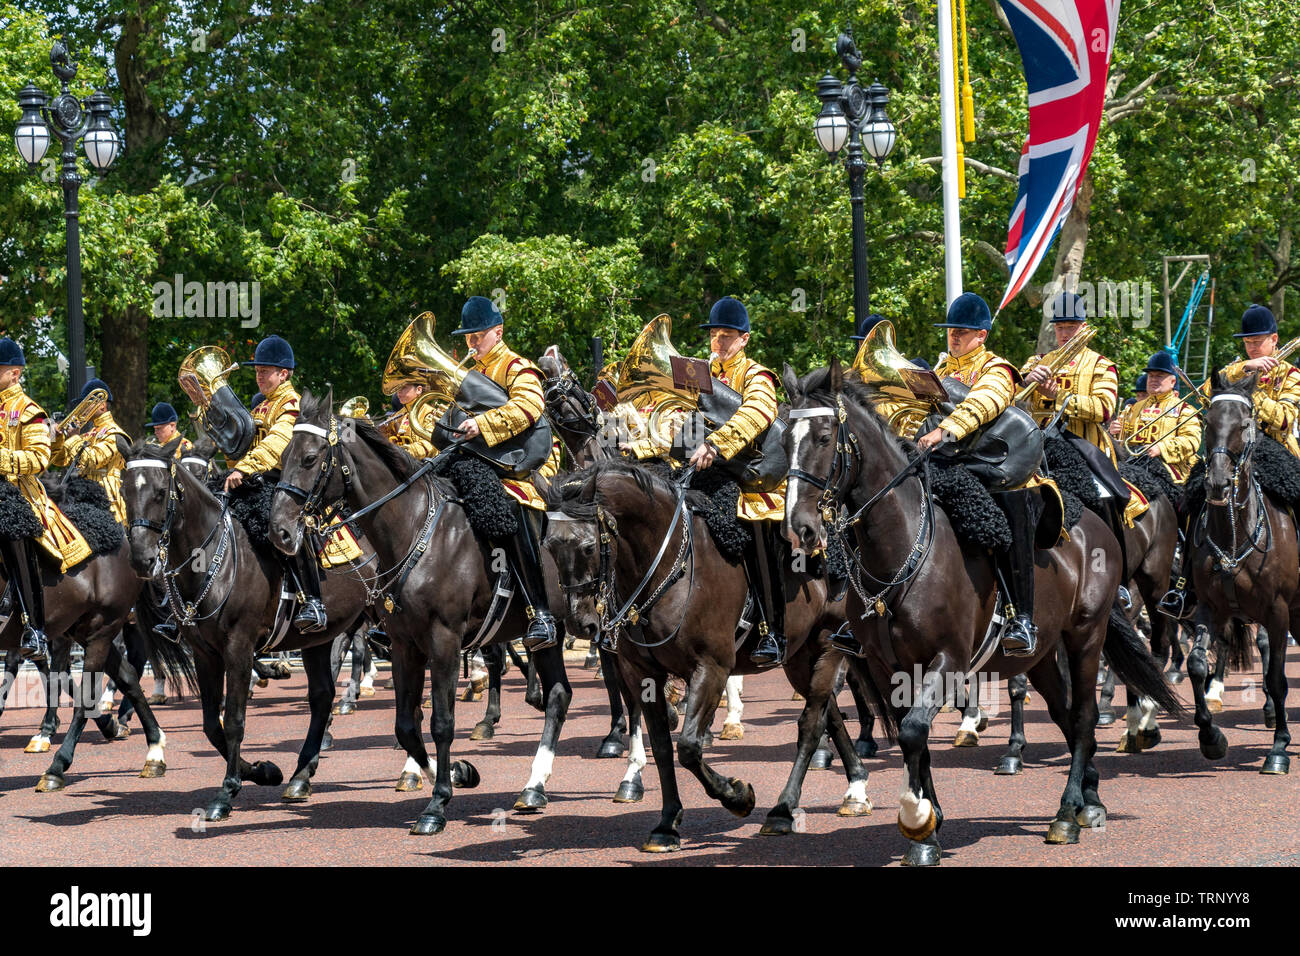 The Mounted Band of the Household Cavalry on the Mall at the Trooping the Color Ceremony , Londres UK , 2019 Banque D'Images